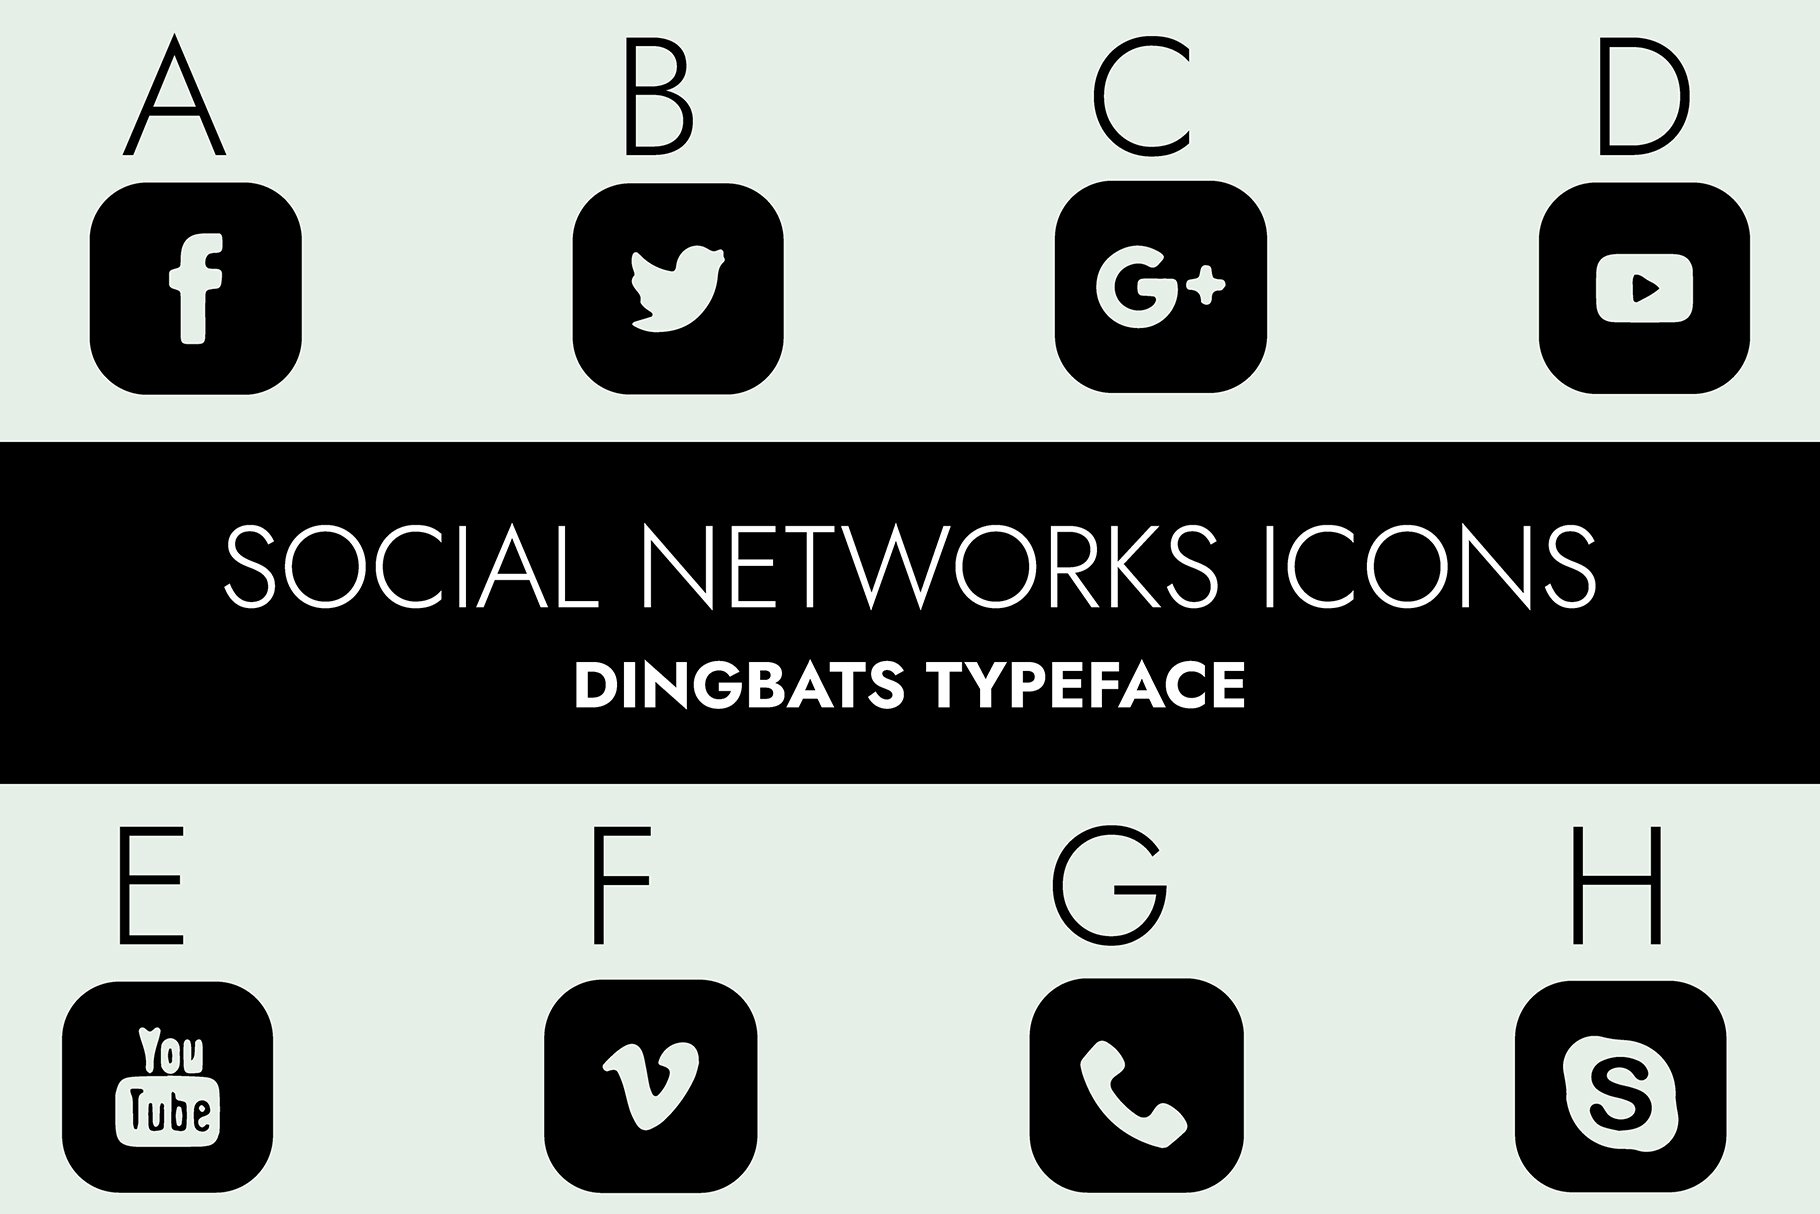 Social Networks Icons Dingbats Font cover image.